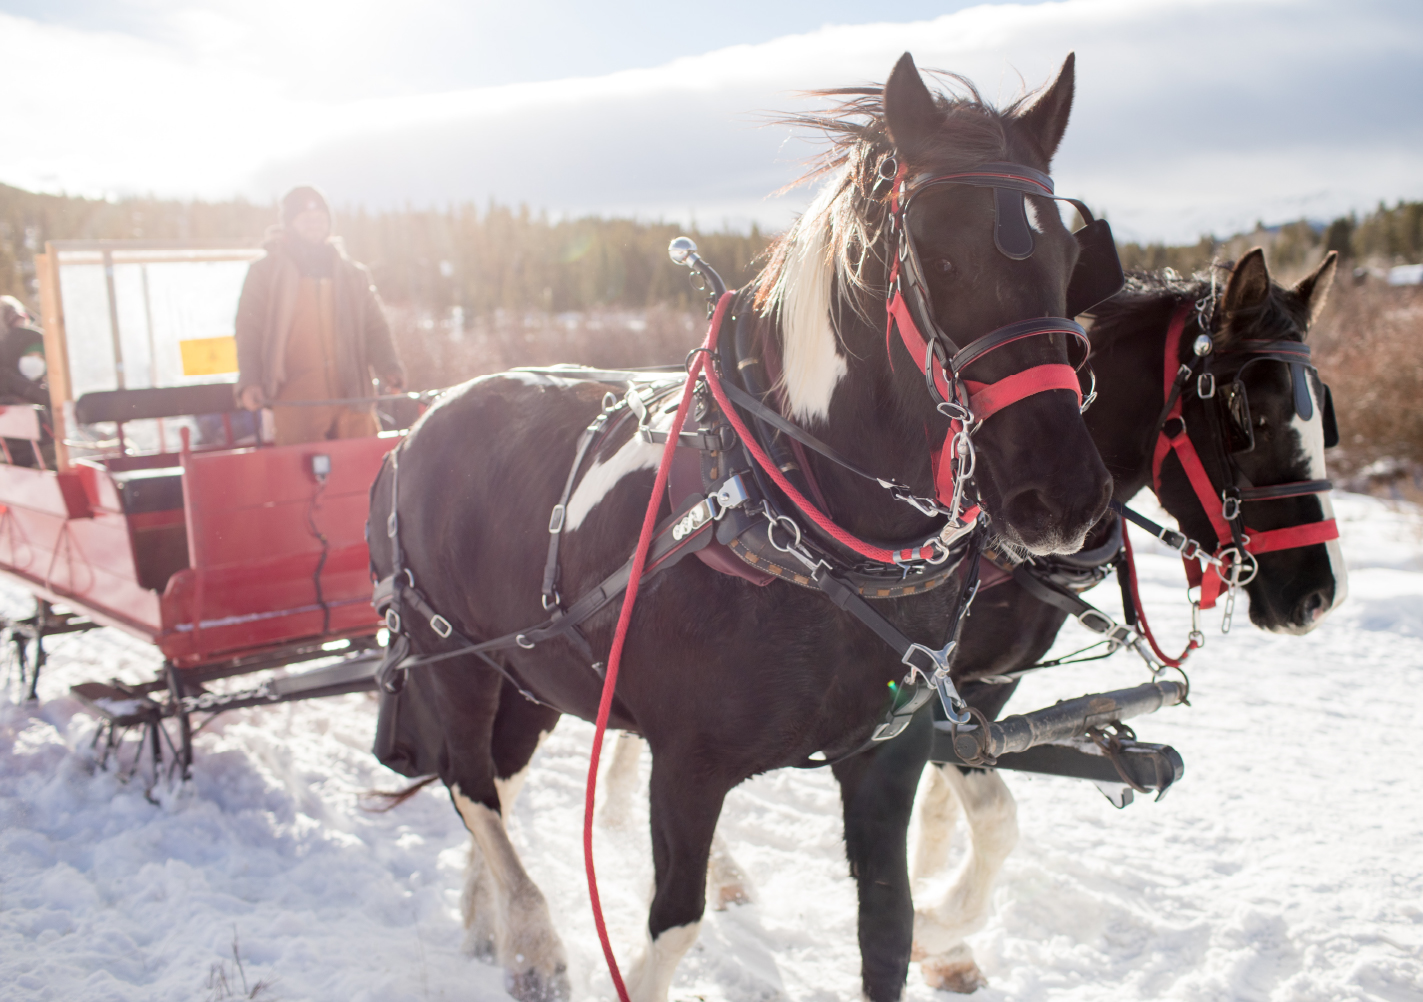 People take a sleigh and carriage ride through Park City in the winter.